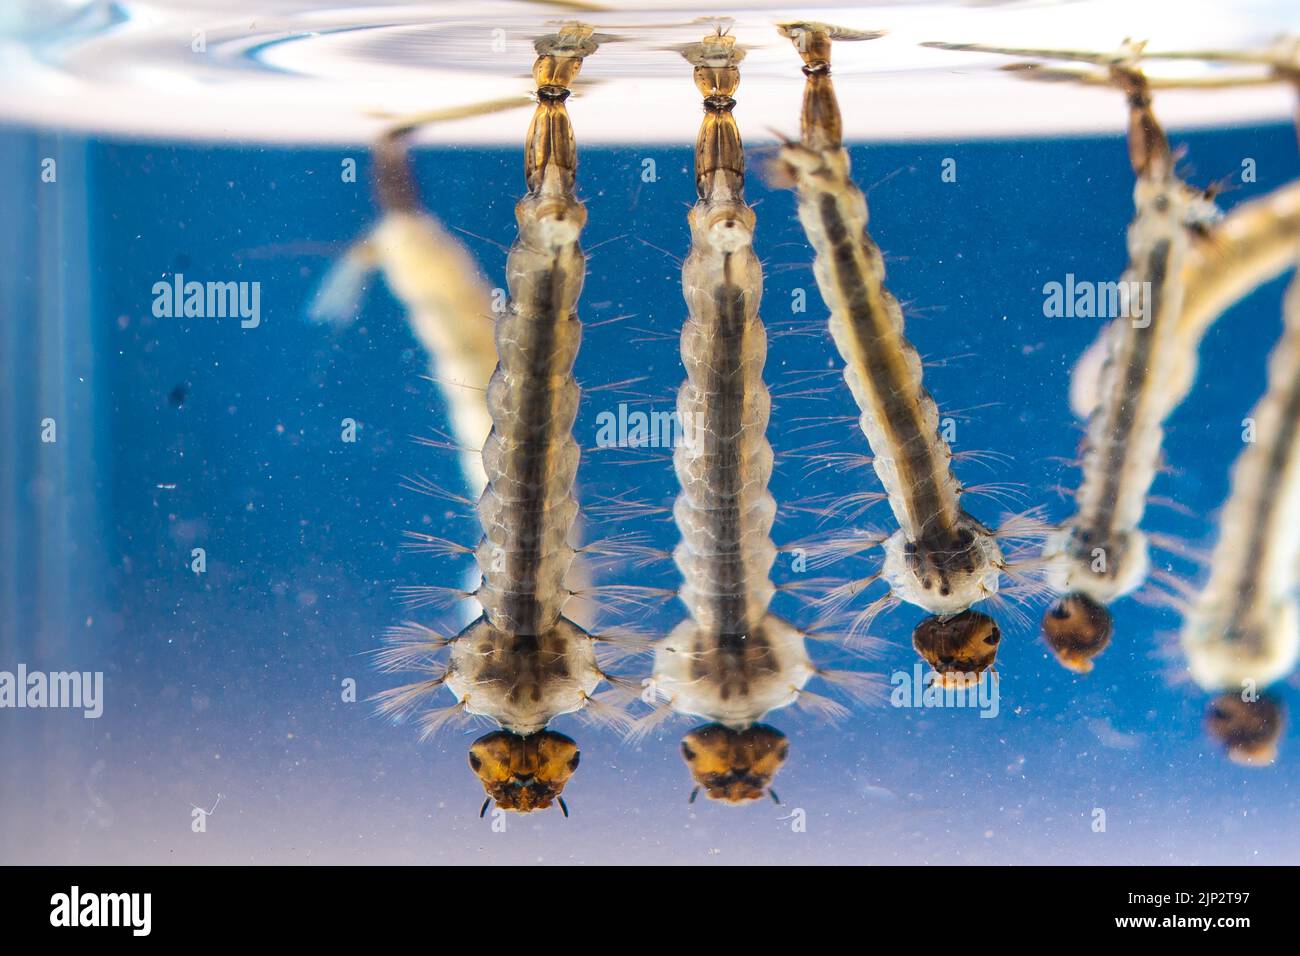 Asian tiger mosquito larvae in water alive, Aedes albopictus. Exotic species, invasive mosquito. Aedes. Macrophotography, close-up. Larval stages Stock Photo